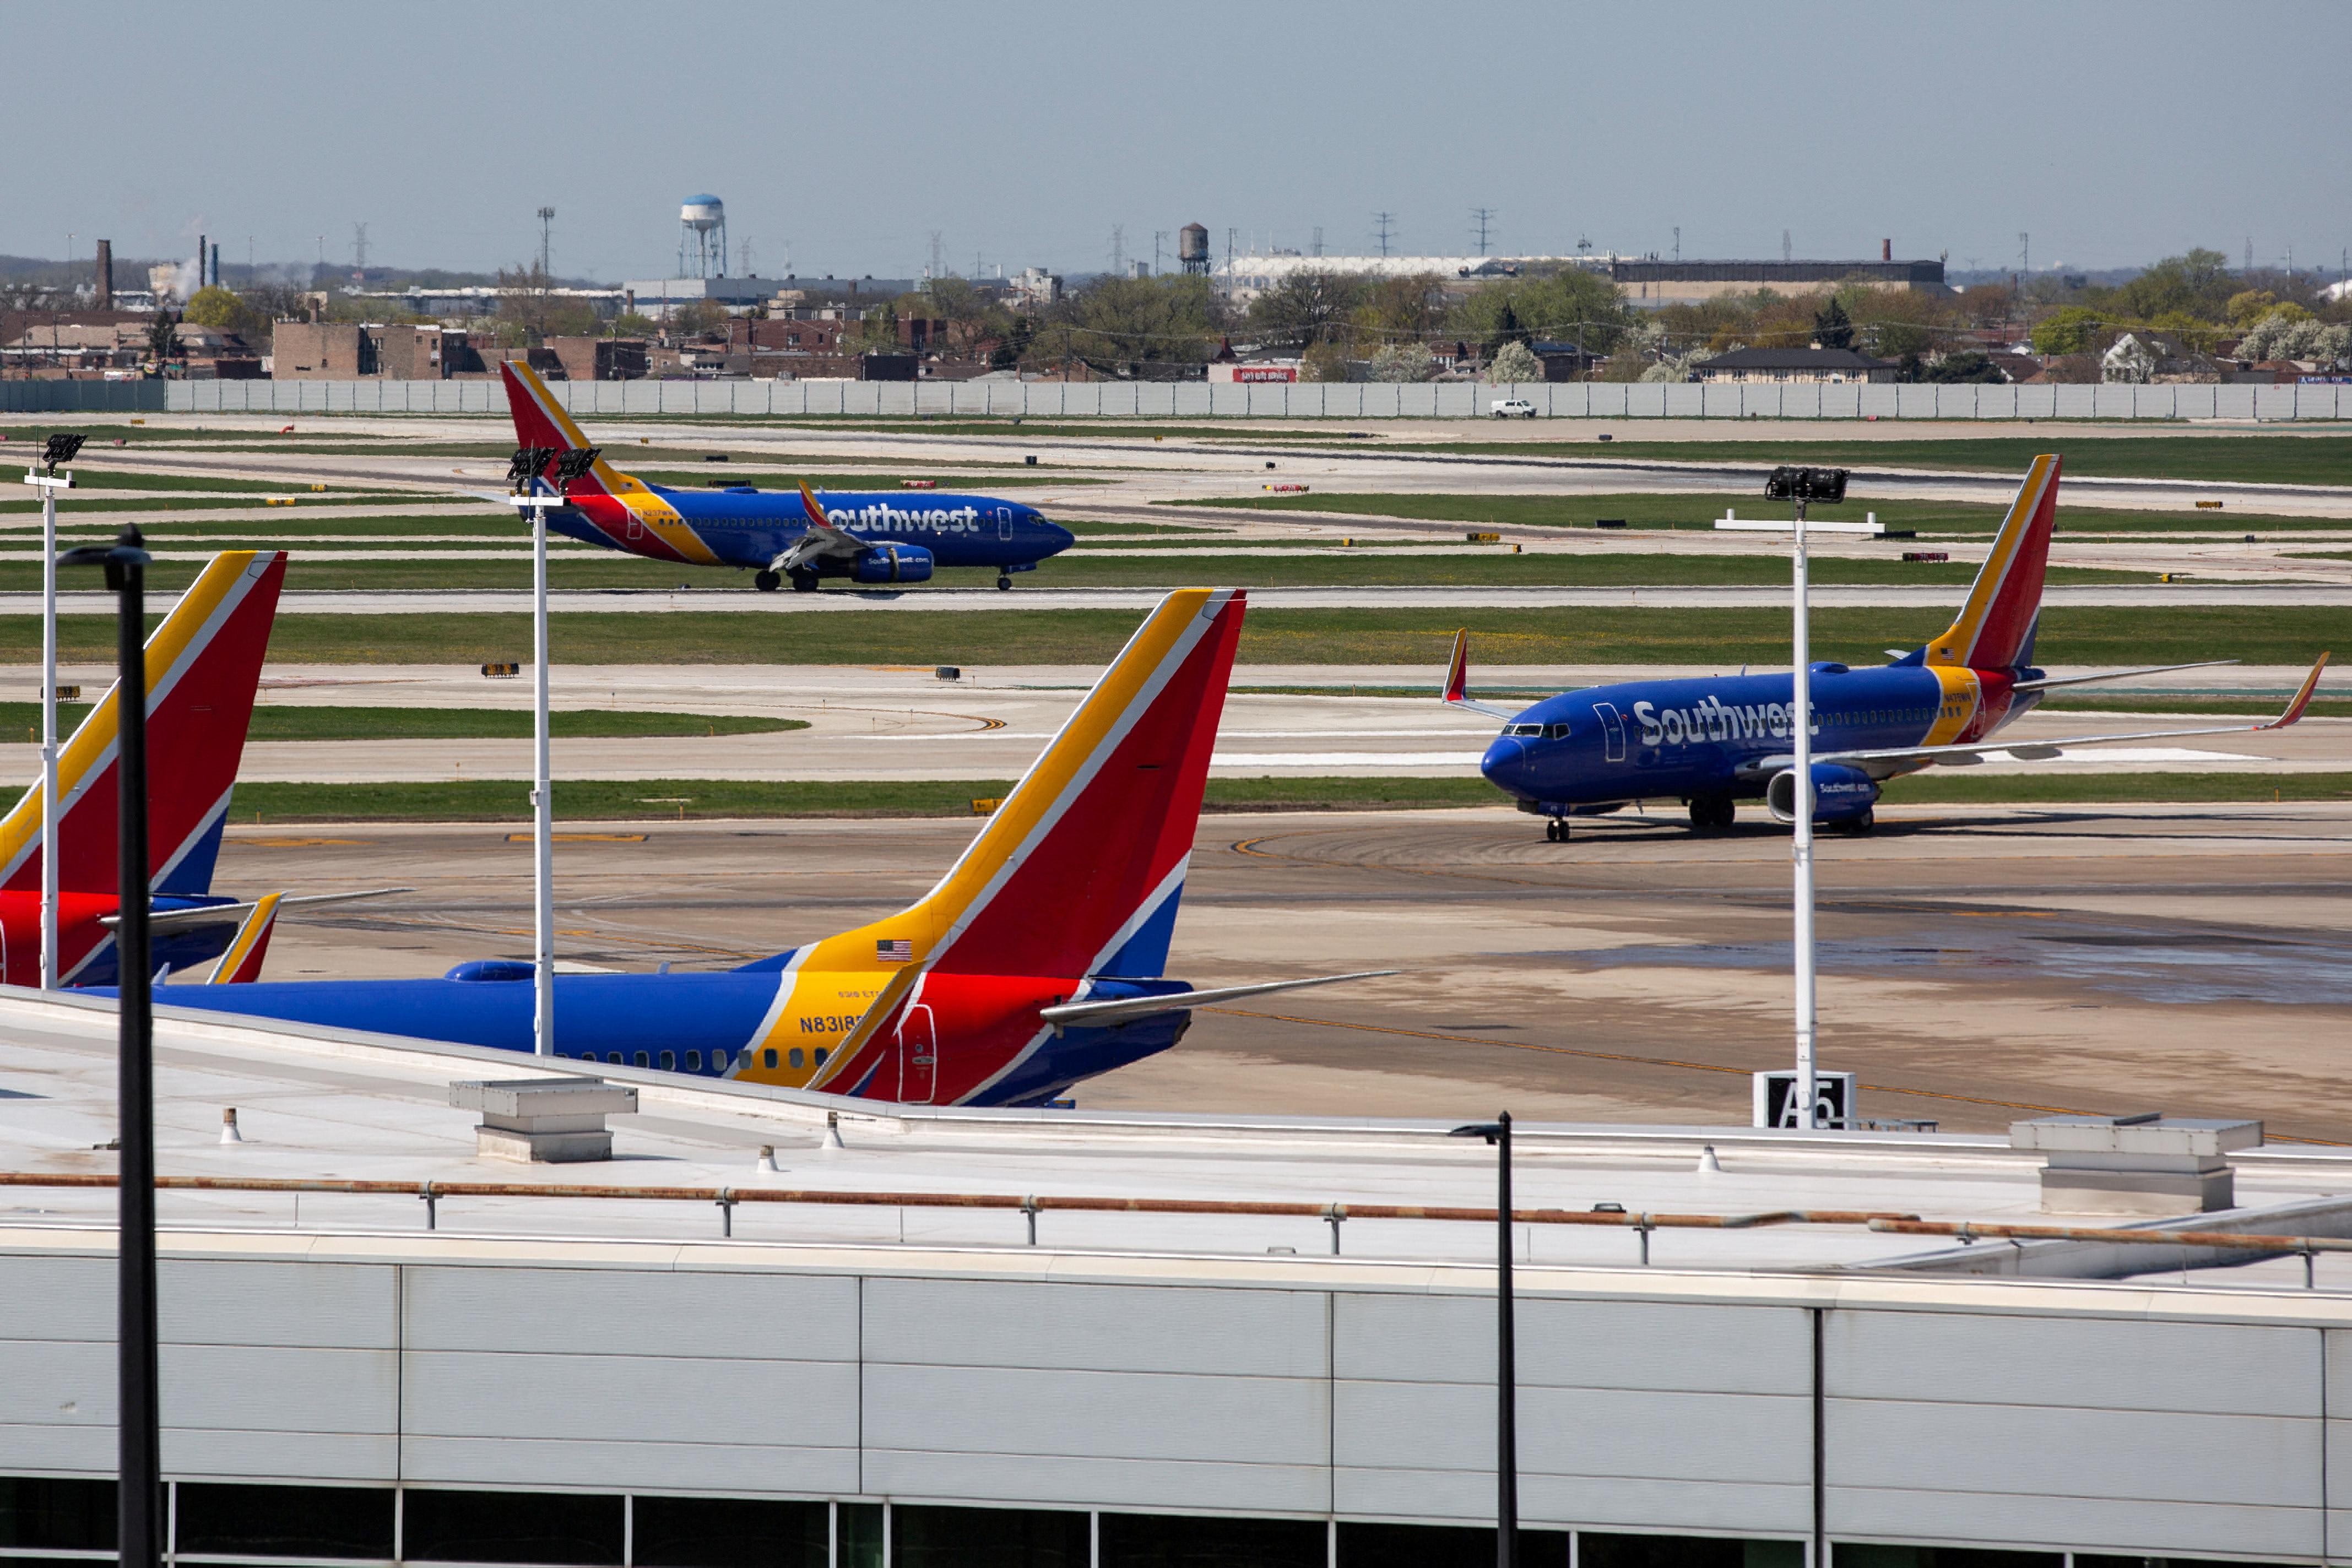 Southwest Airlines just opened the company's biggest maintenance